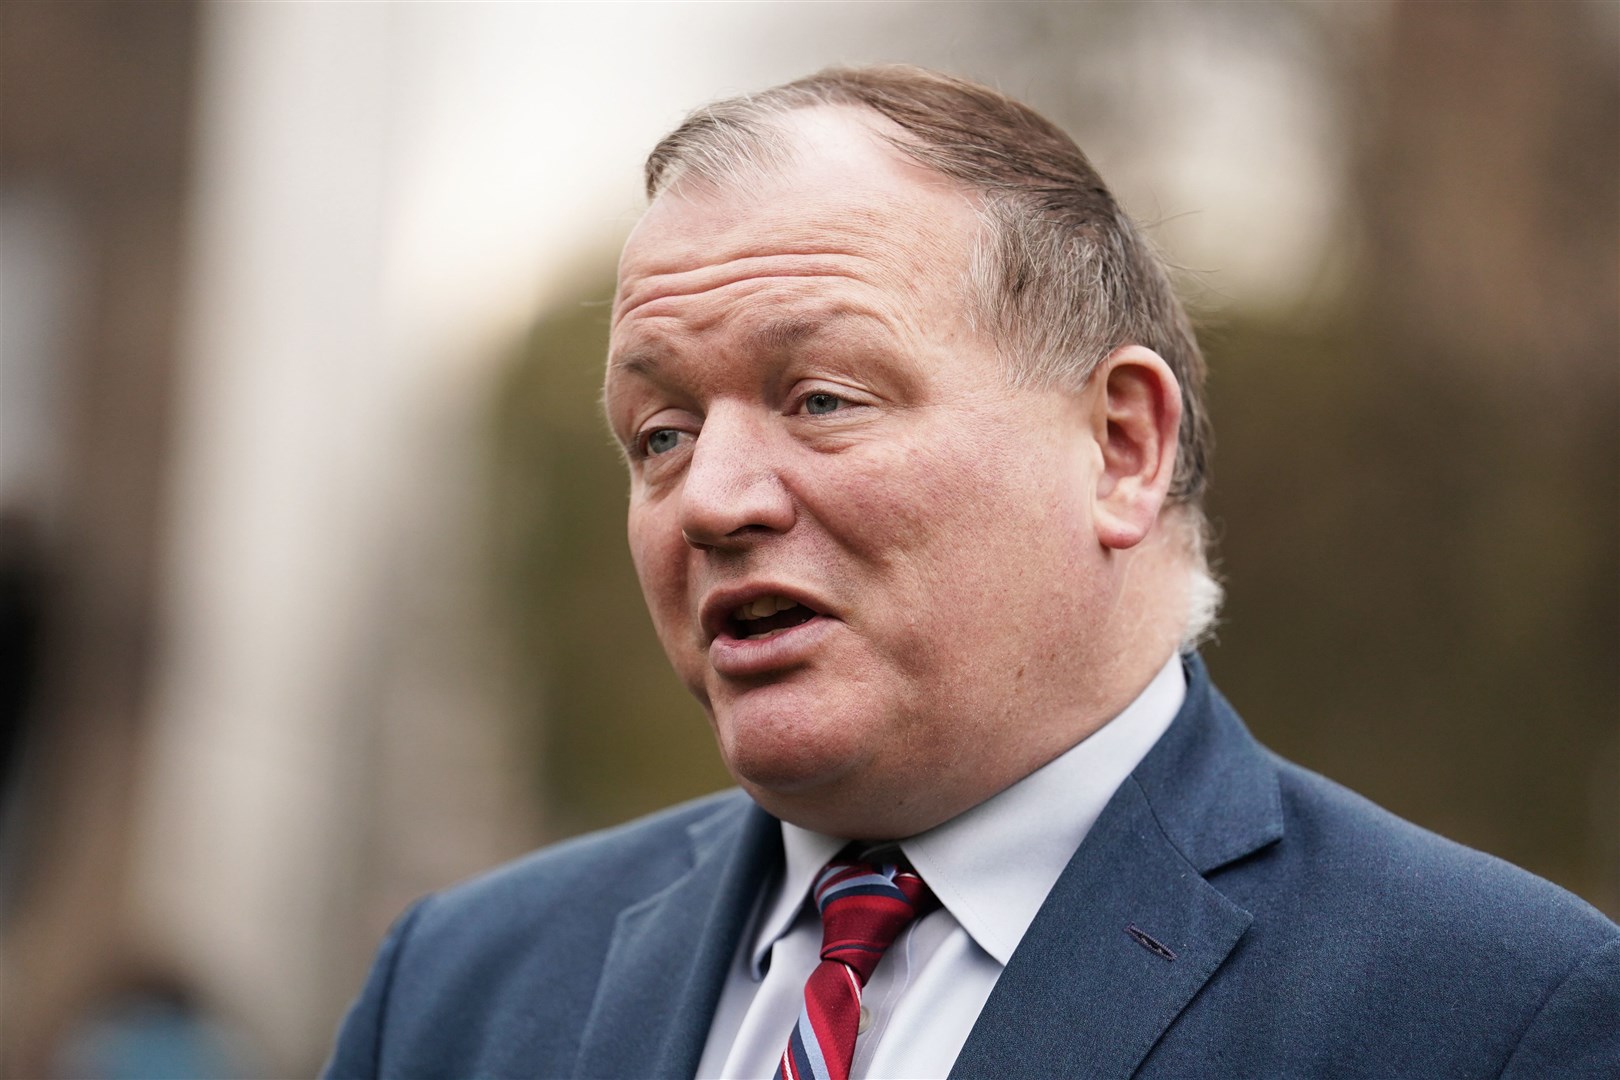 Conservative MP Damian Collins argued that the evidence presented in court was flawed